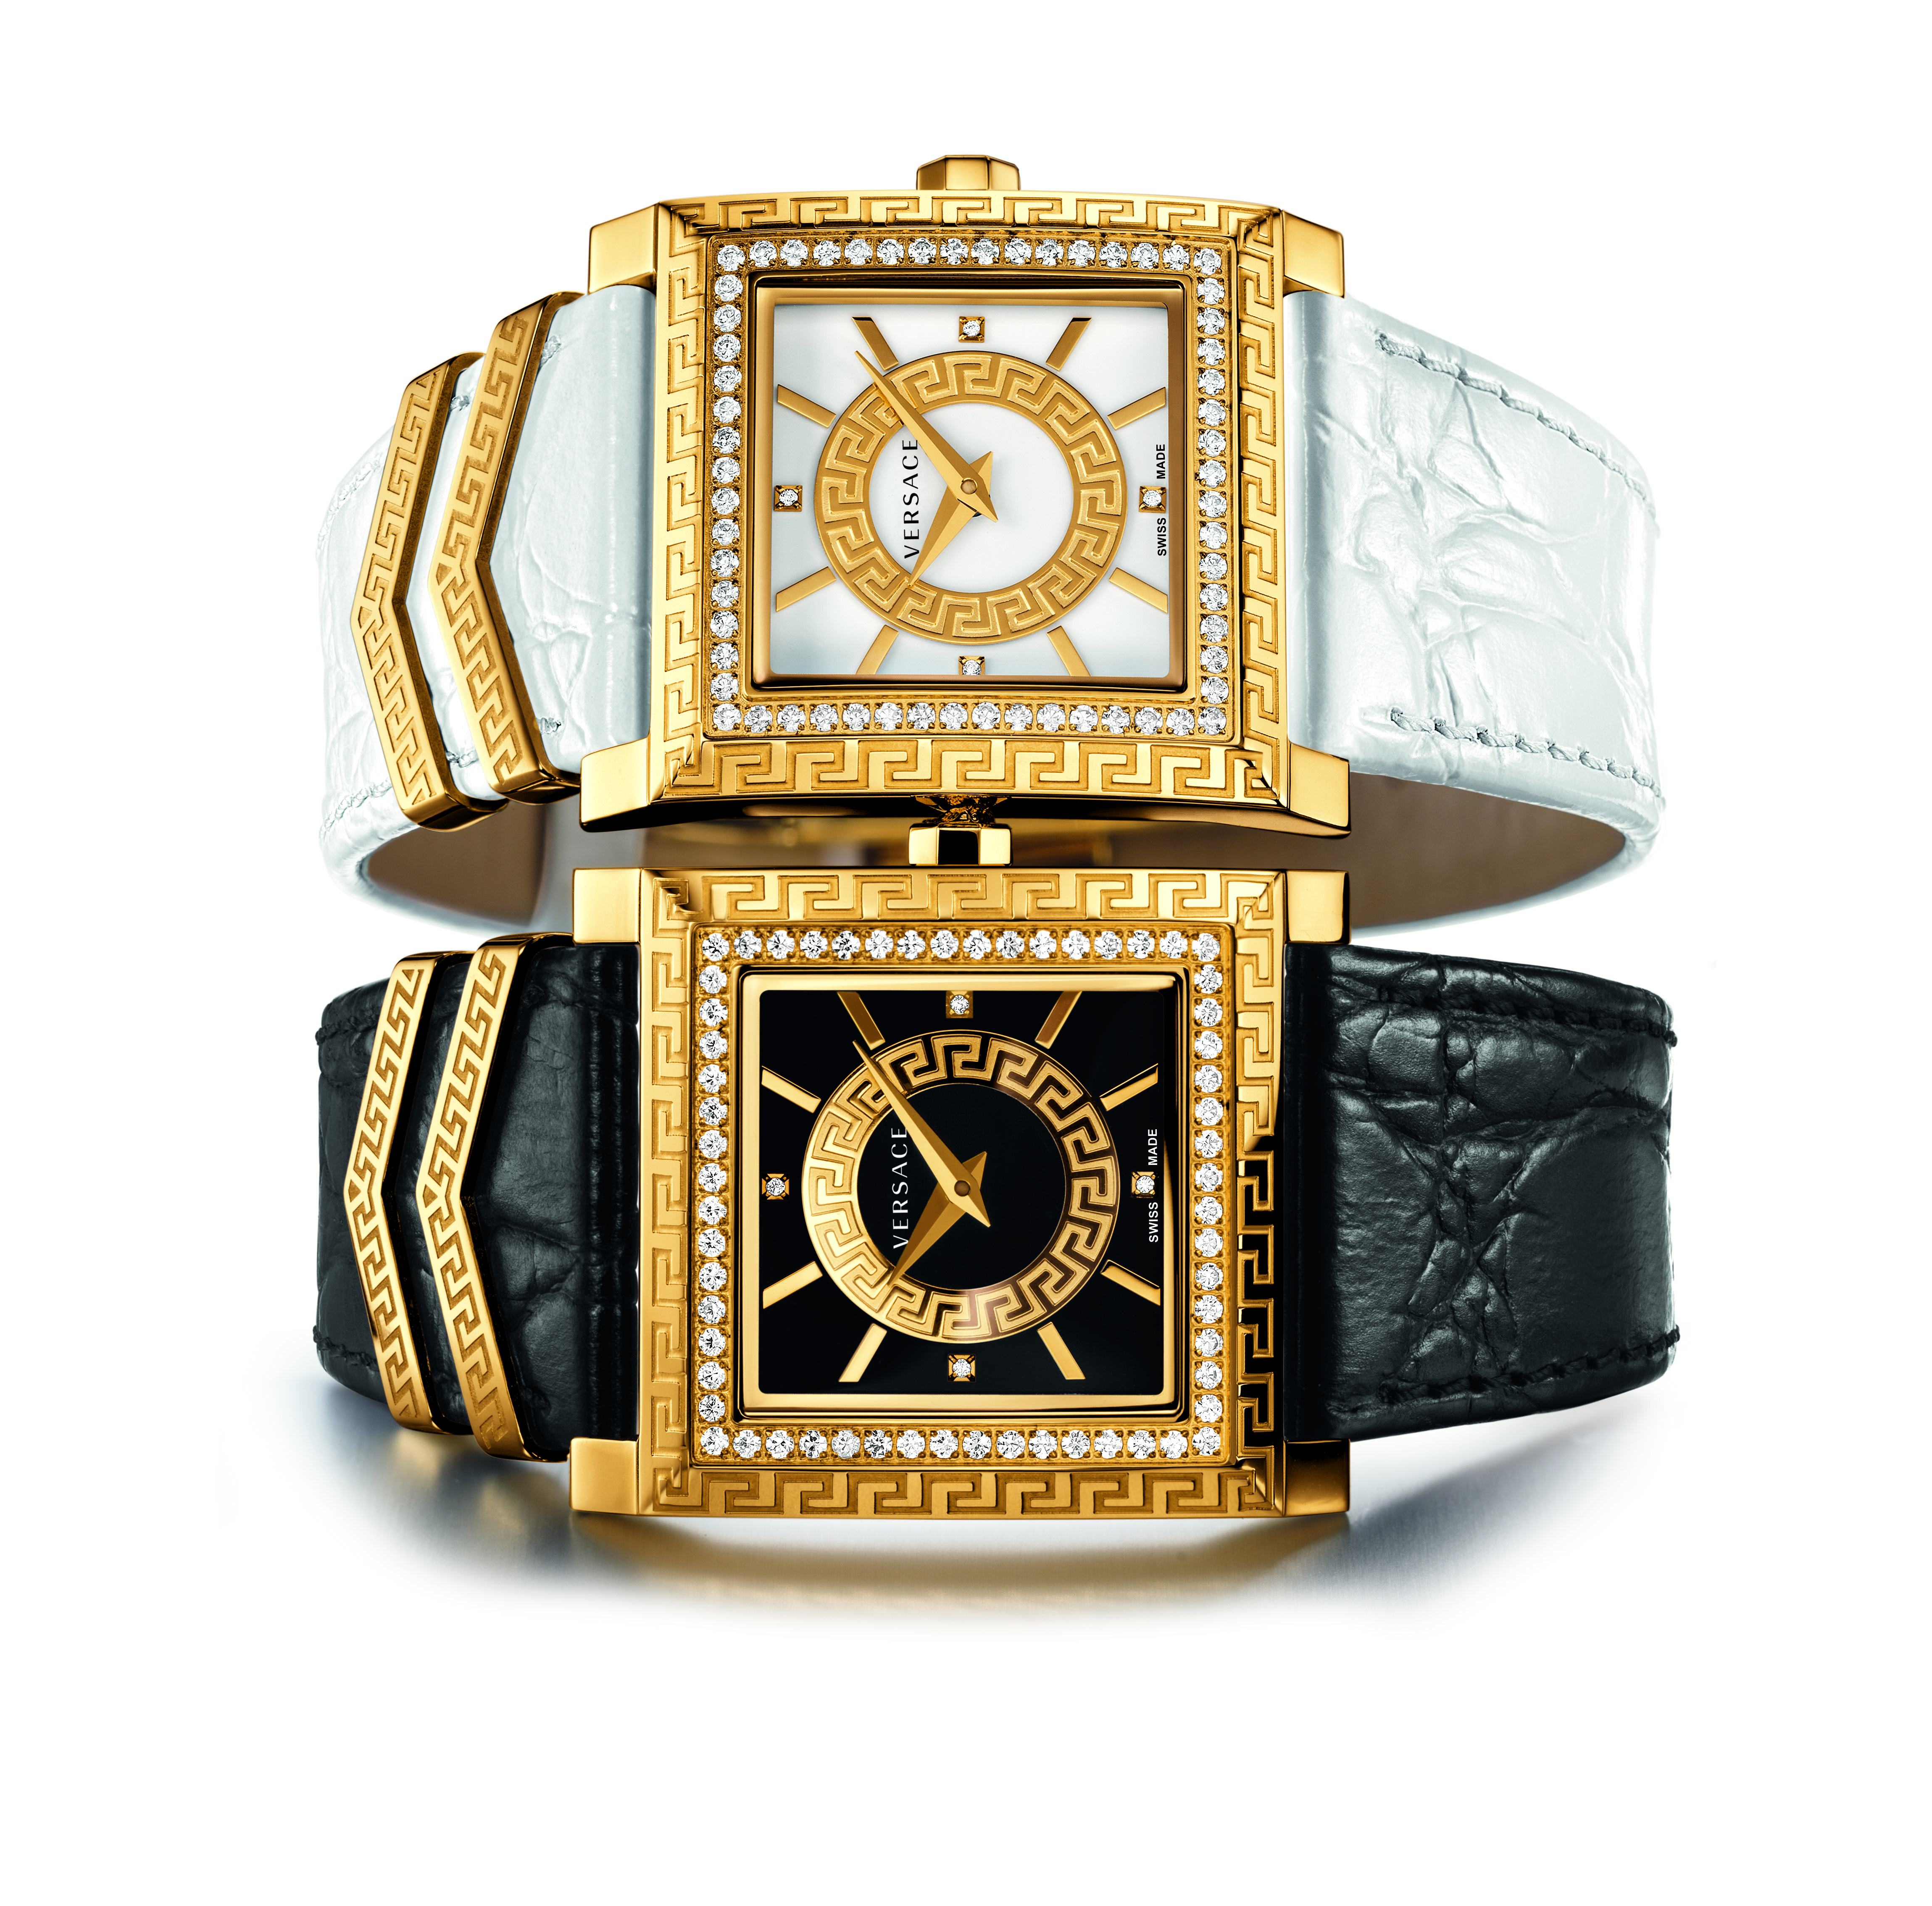 Introducing the Versace DV 25 watch 